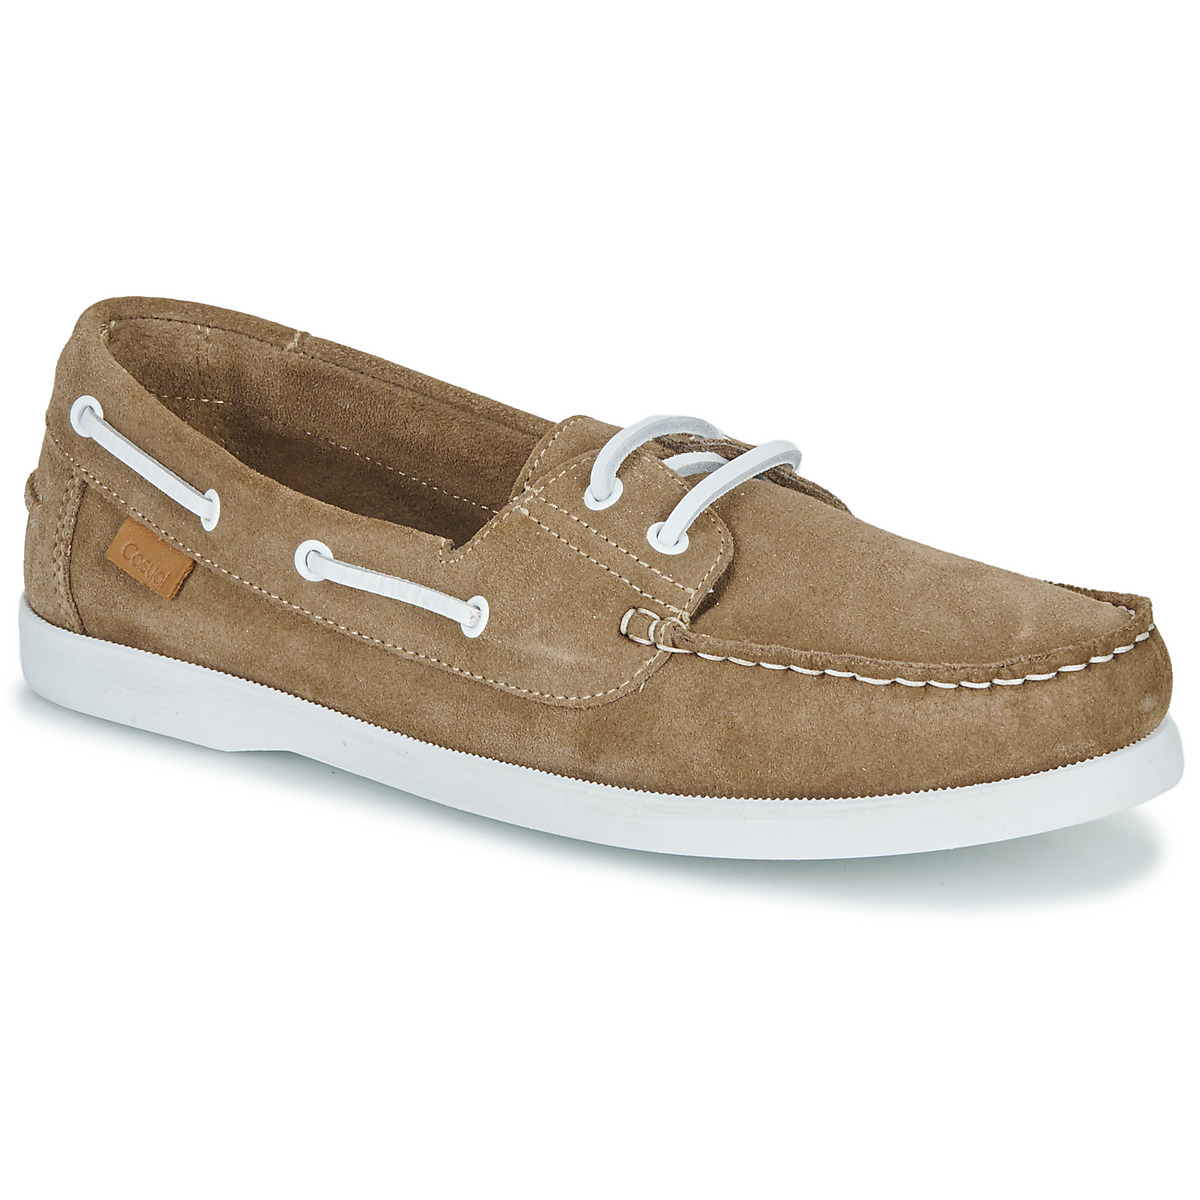 Boat shoes Casual Attitude NEW003